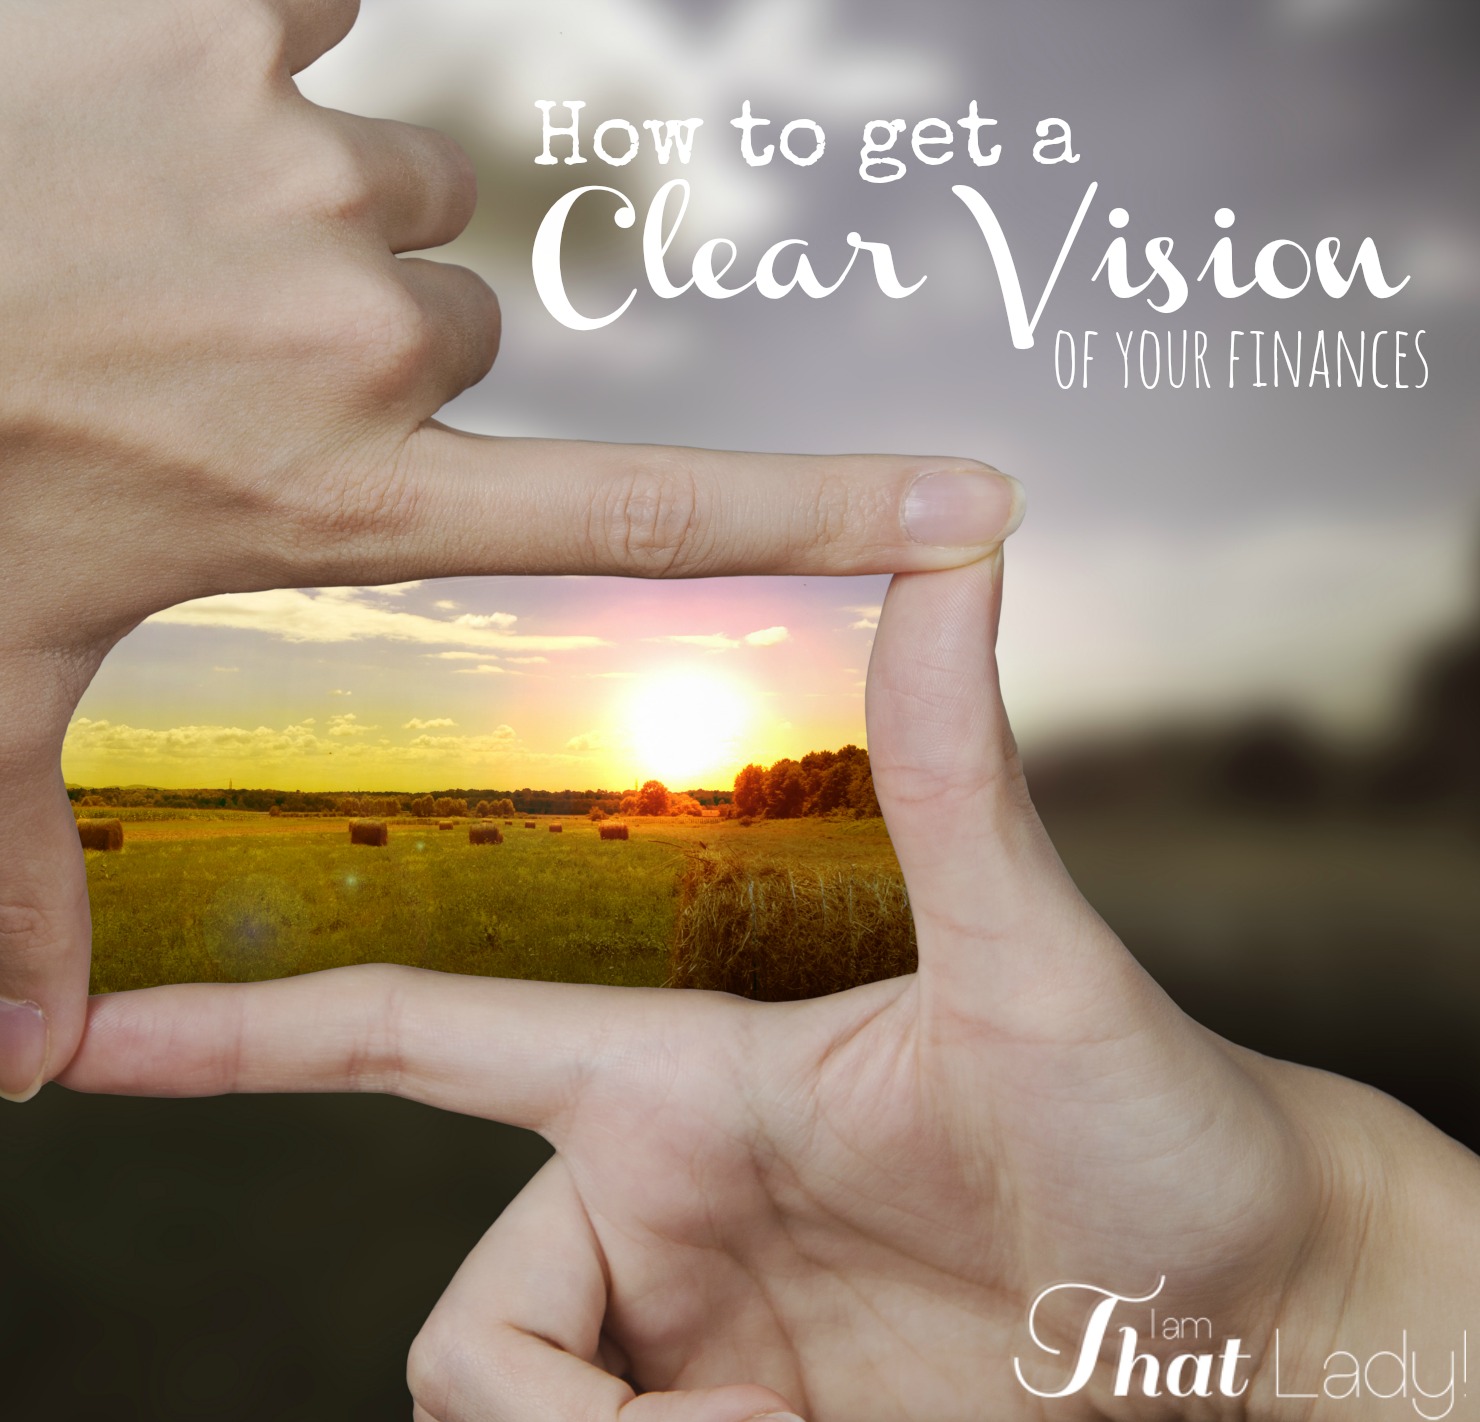 How To Get a Clear Vision of Your Finances - Lauren Greutman